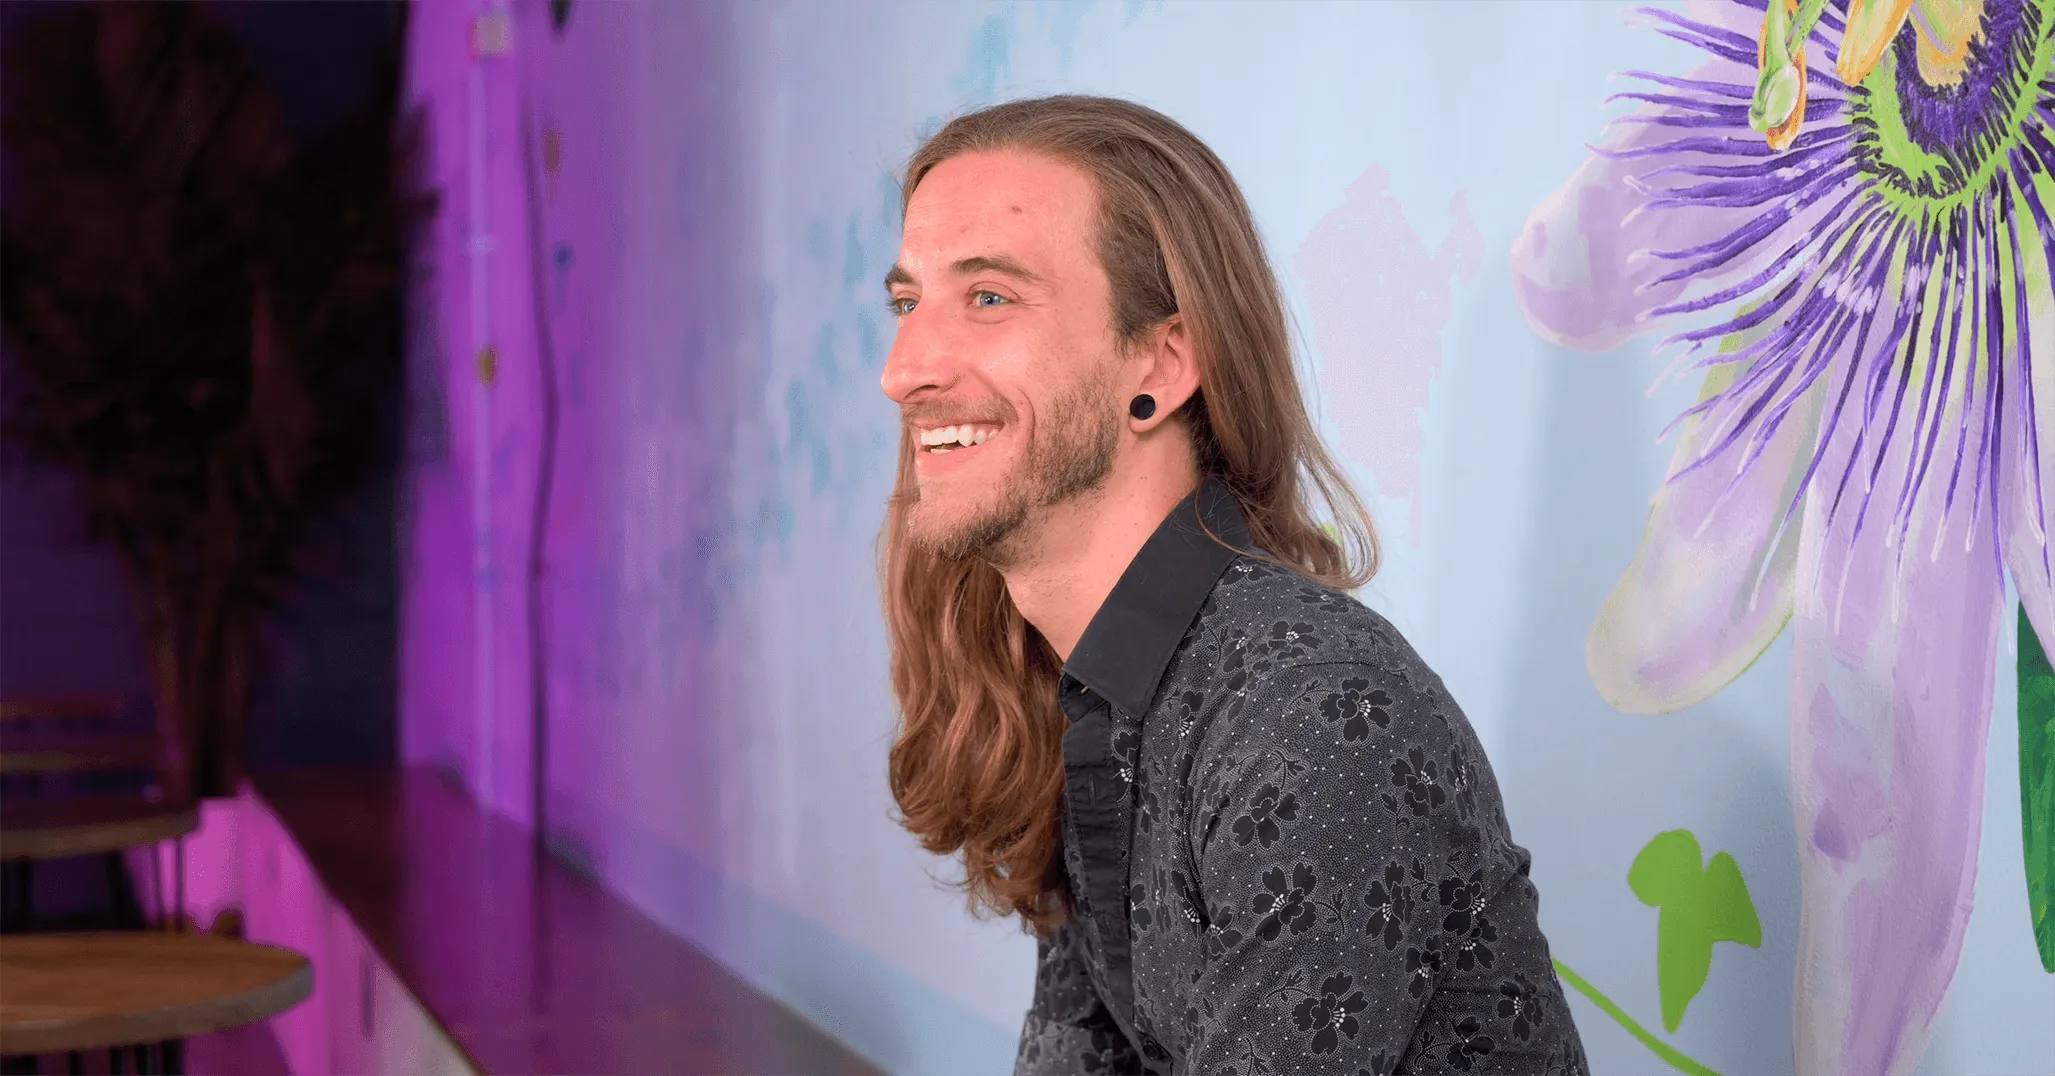 Side profile of a smiling man with long hair in front of a colorful mural with a large flower illustration.